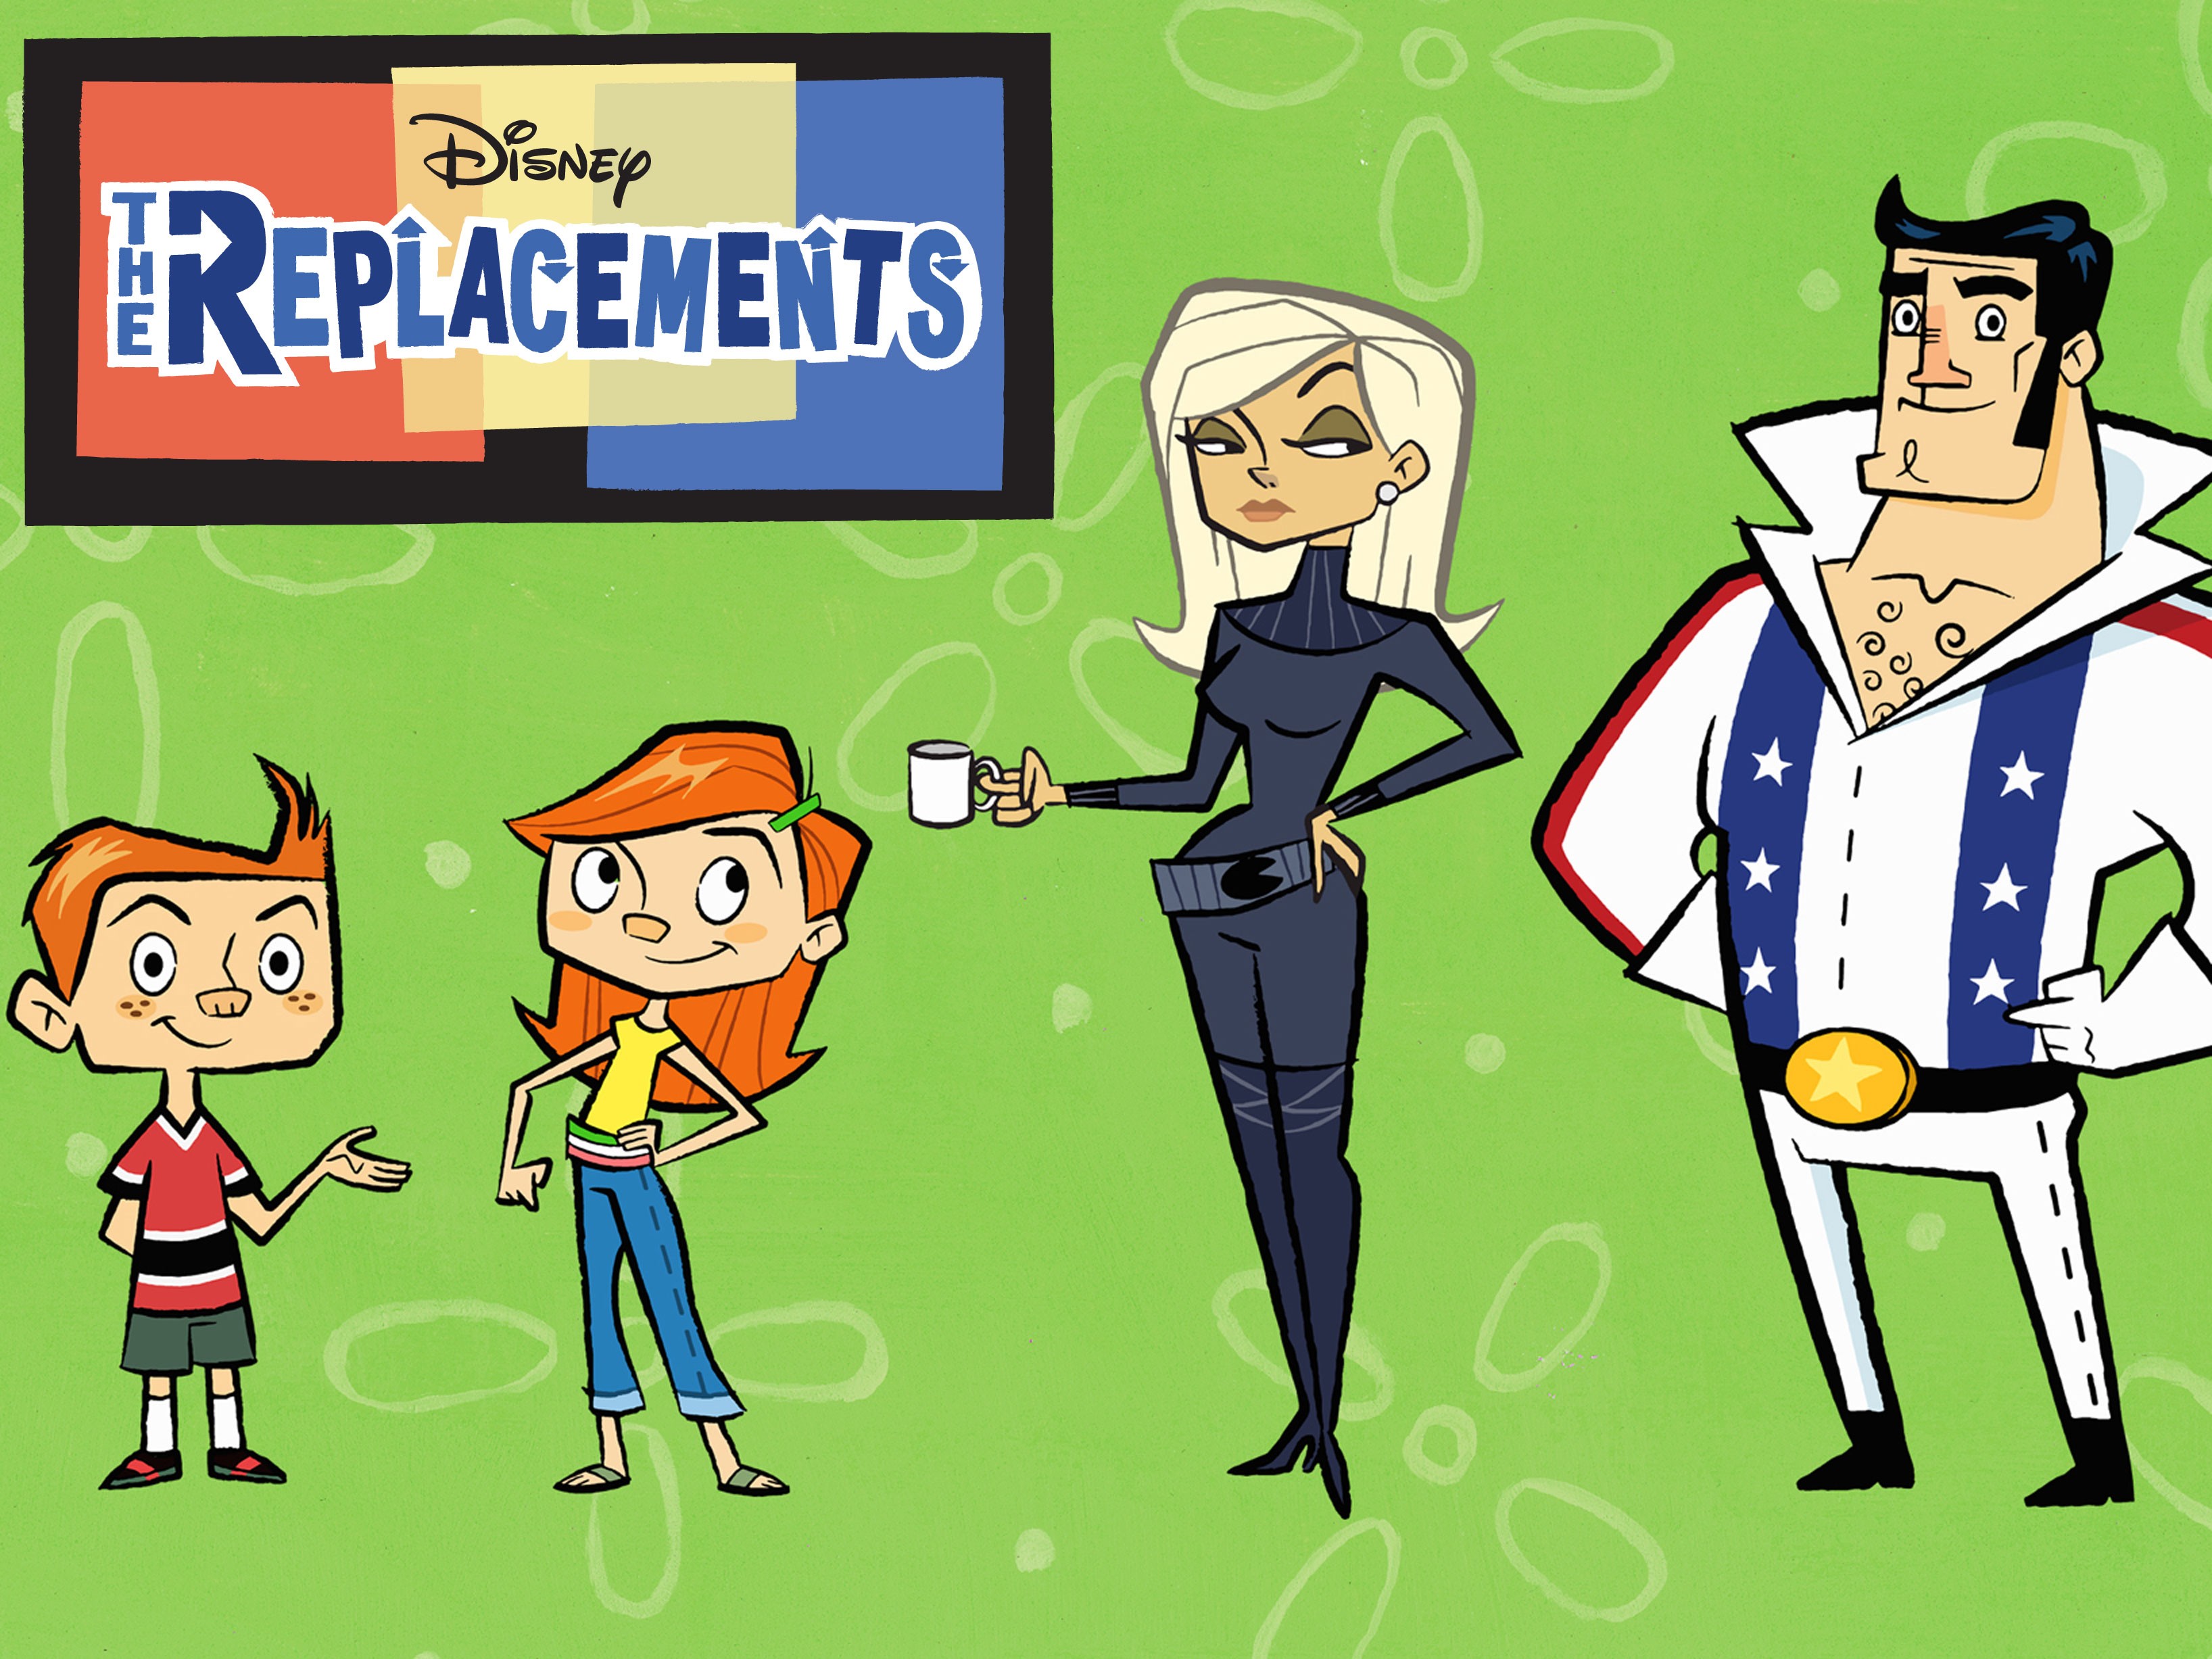 The replacements cartoon